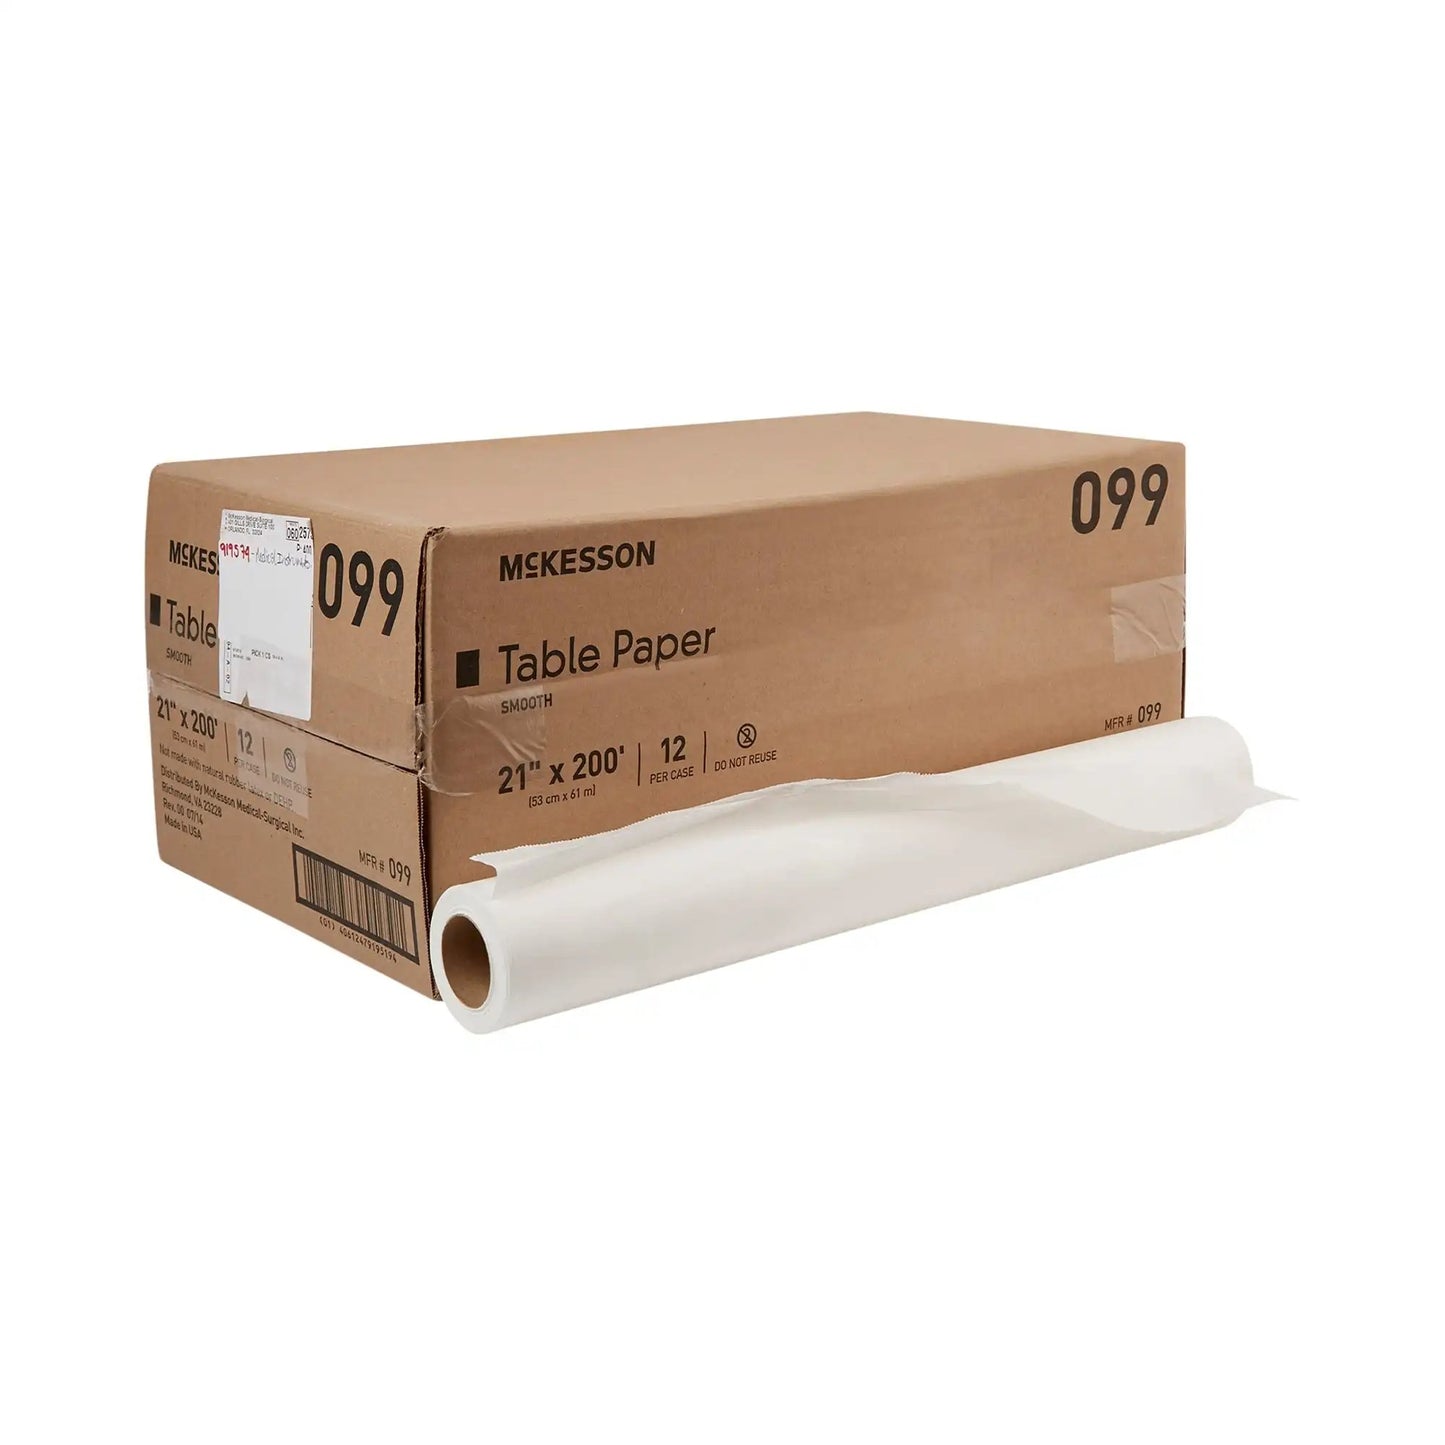 McKesson Table Paper, 21 Inch x 200 Foot